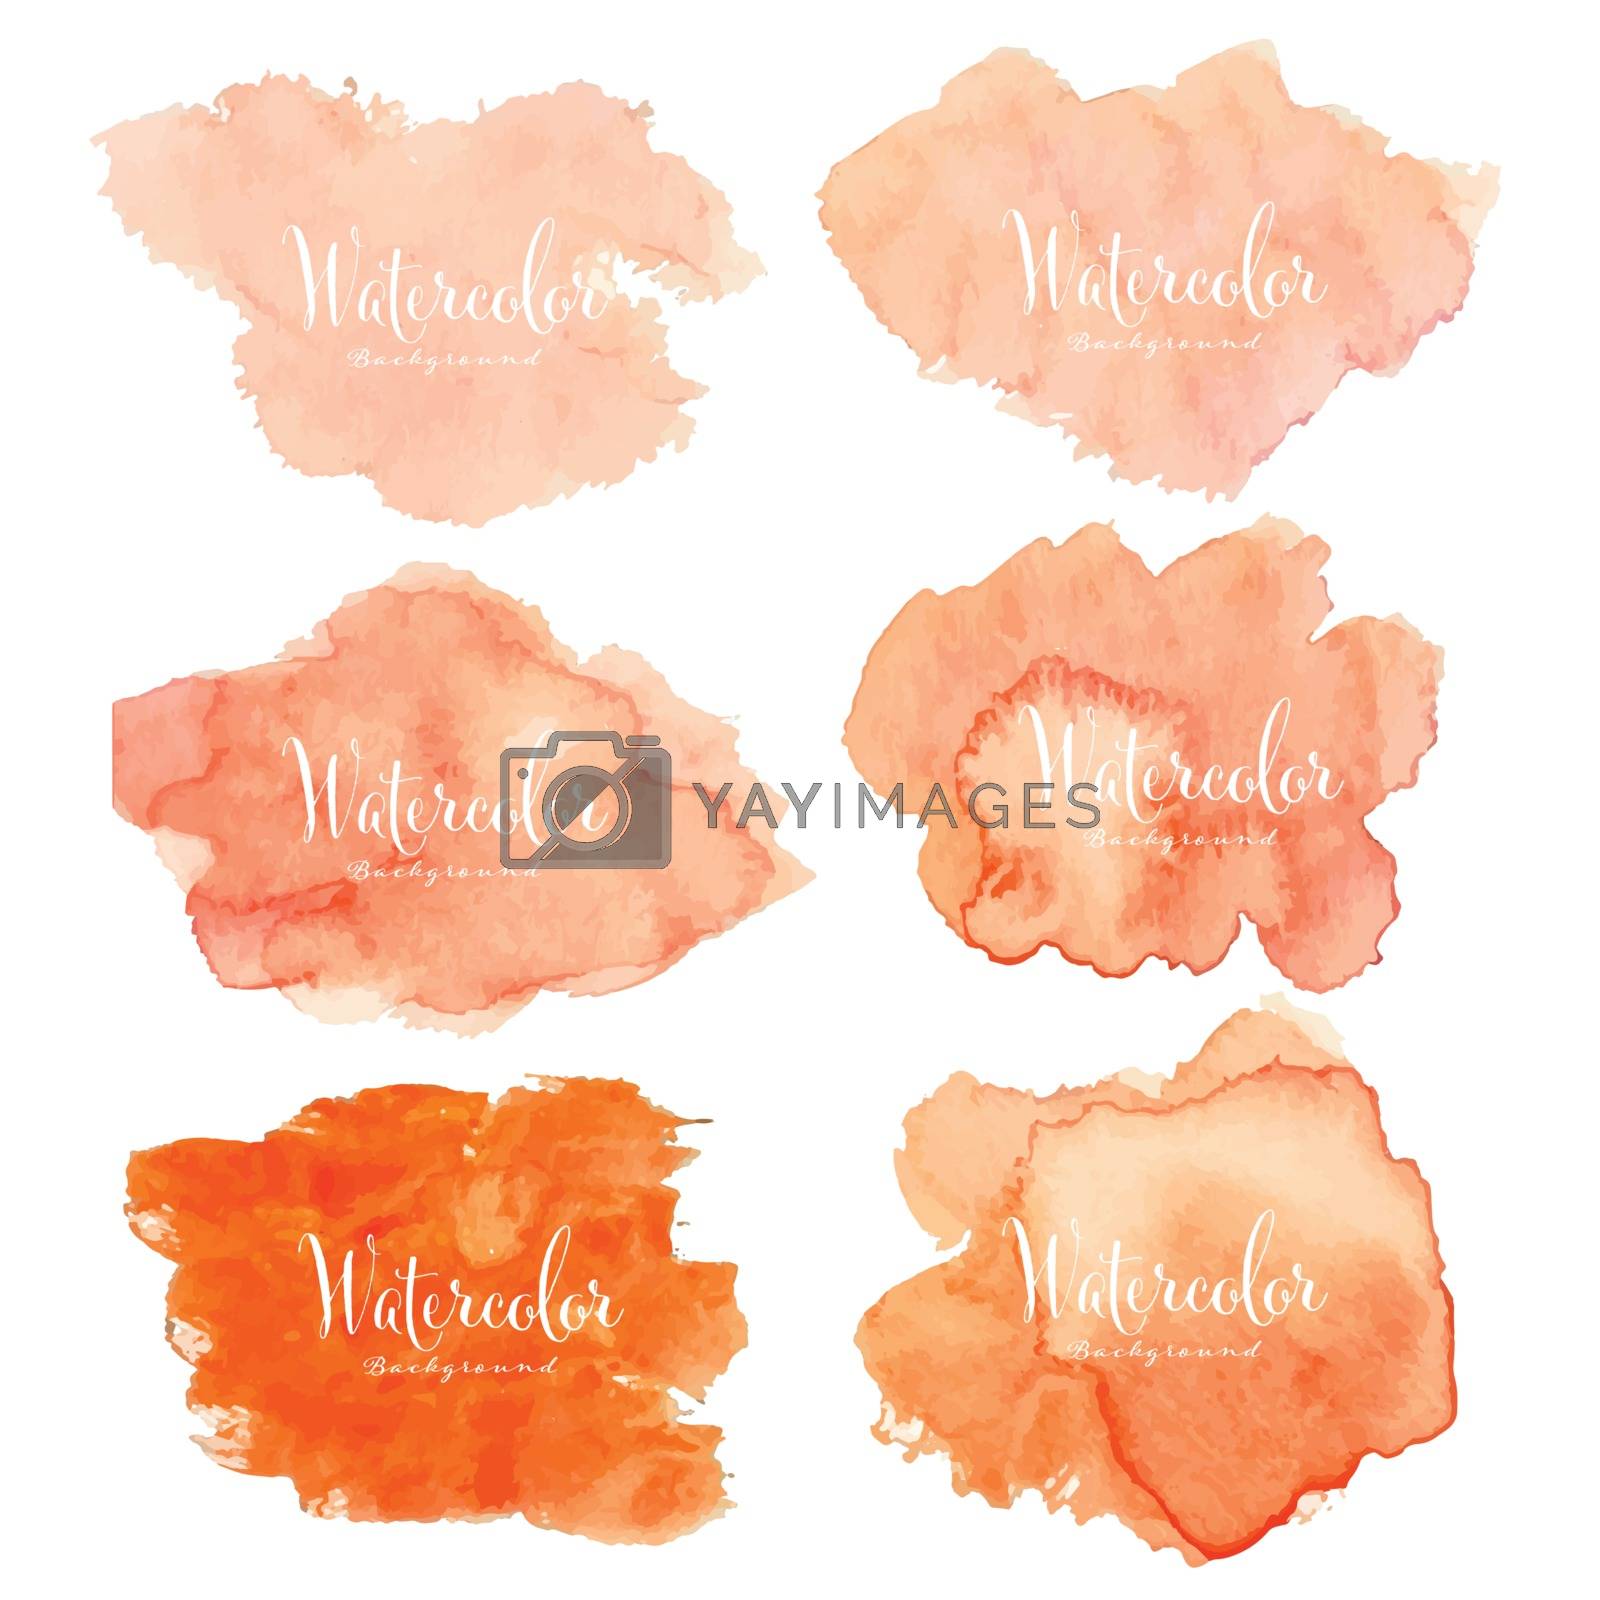 Royalty free image of Abstract watercolor background. Watercolor element for card. Vector illustration. by Oneywhy